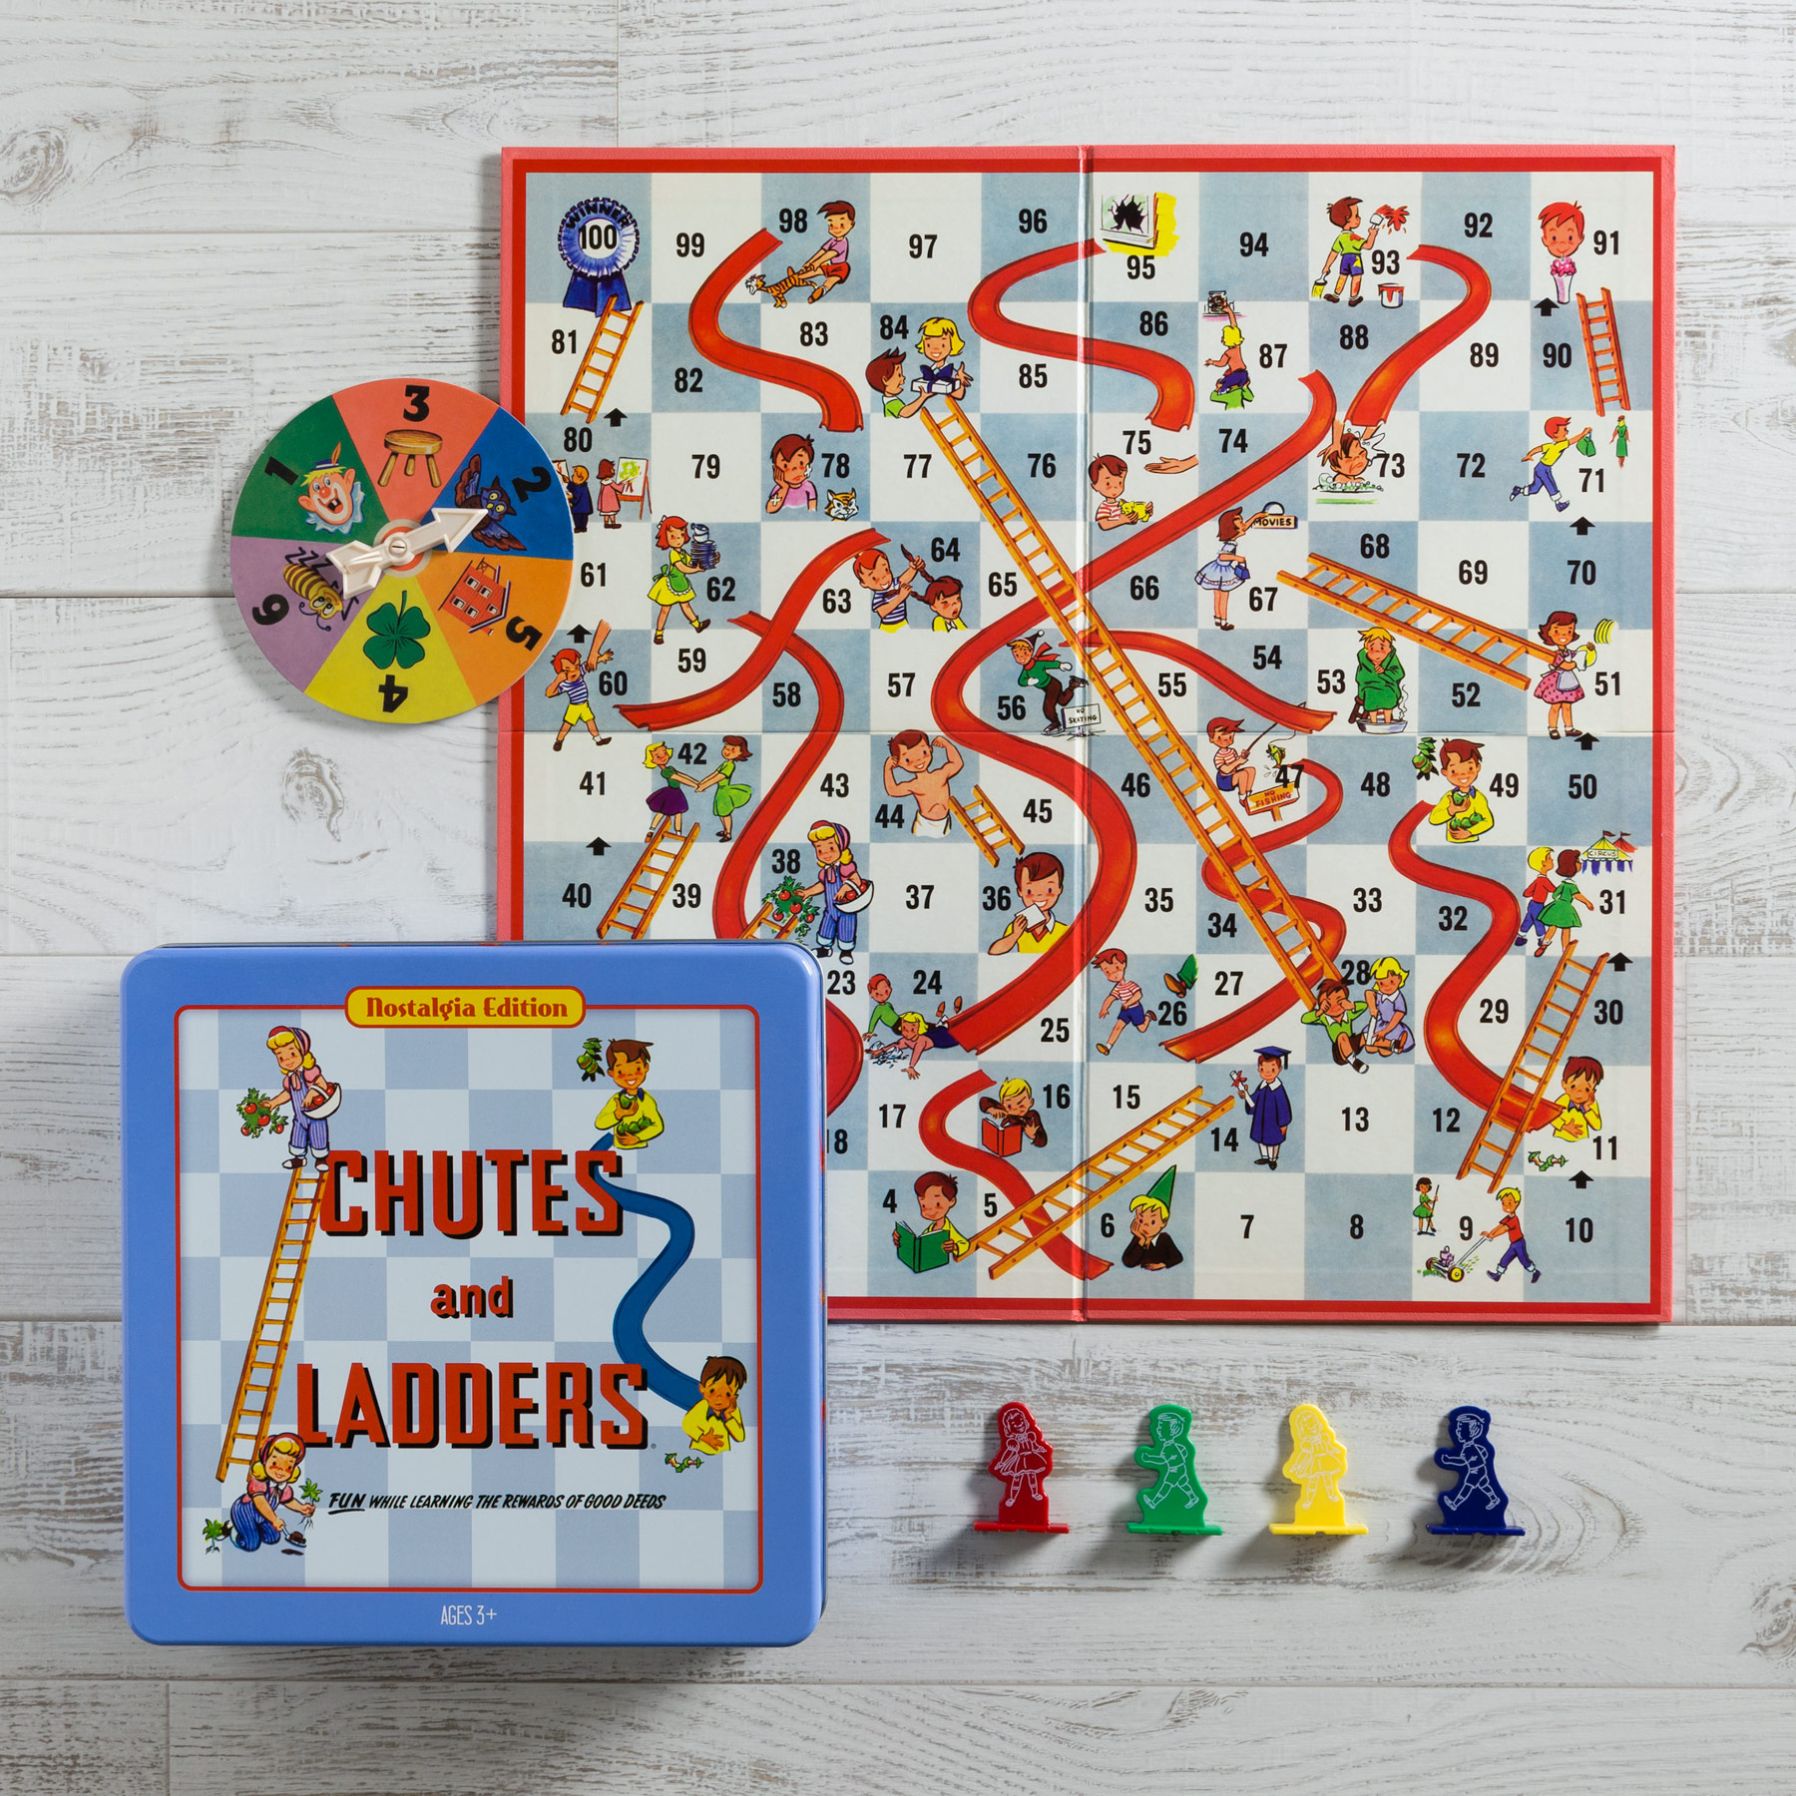 Chutes and Ladders Nostalgia Edition